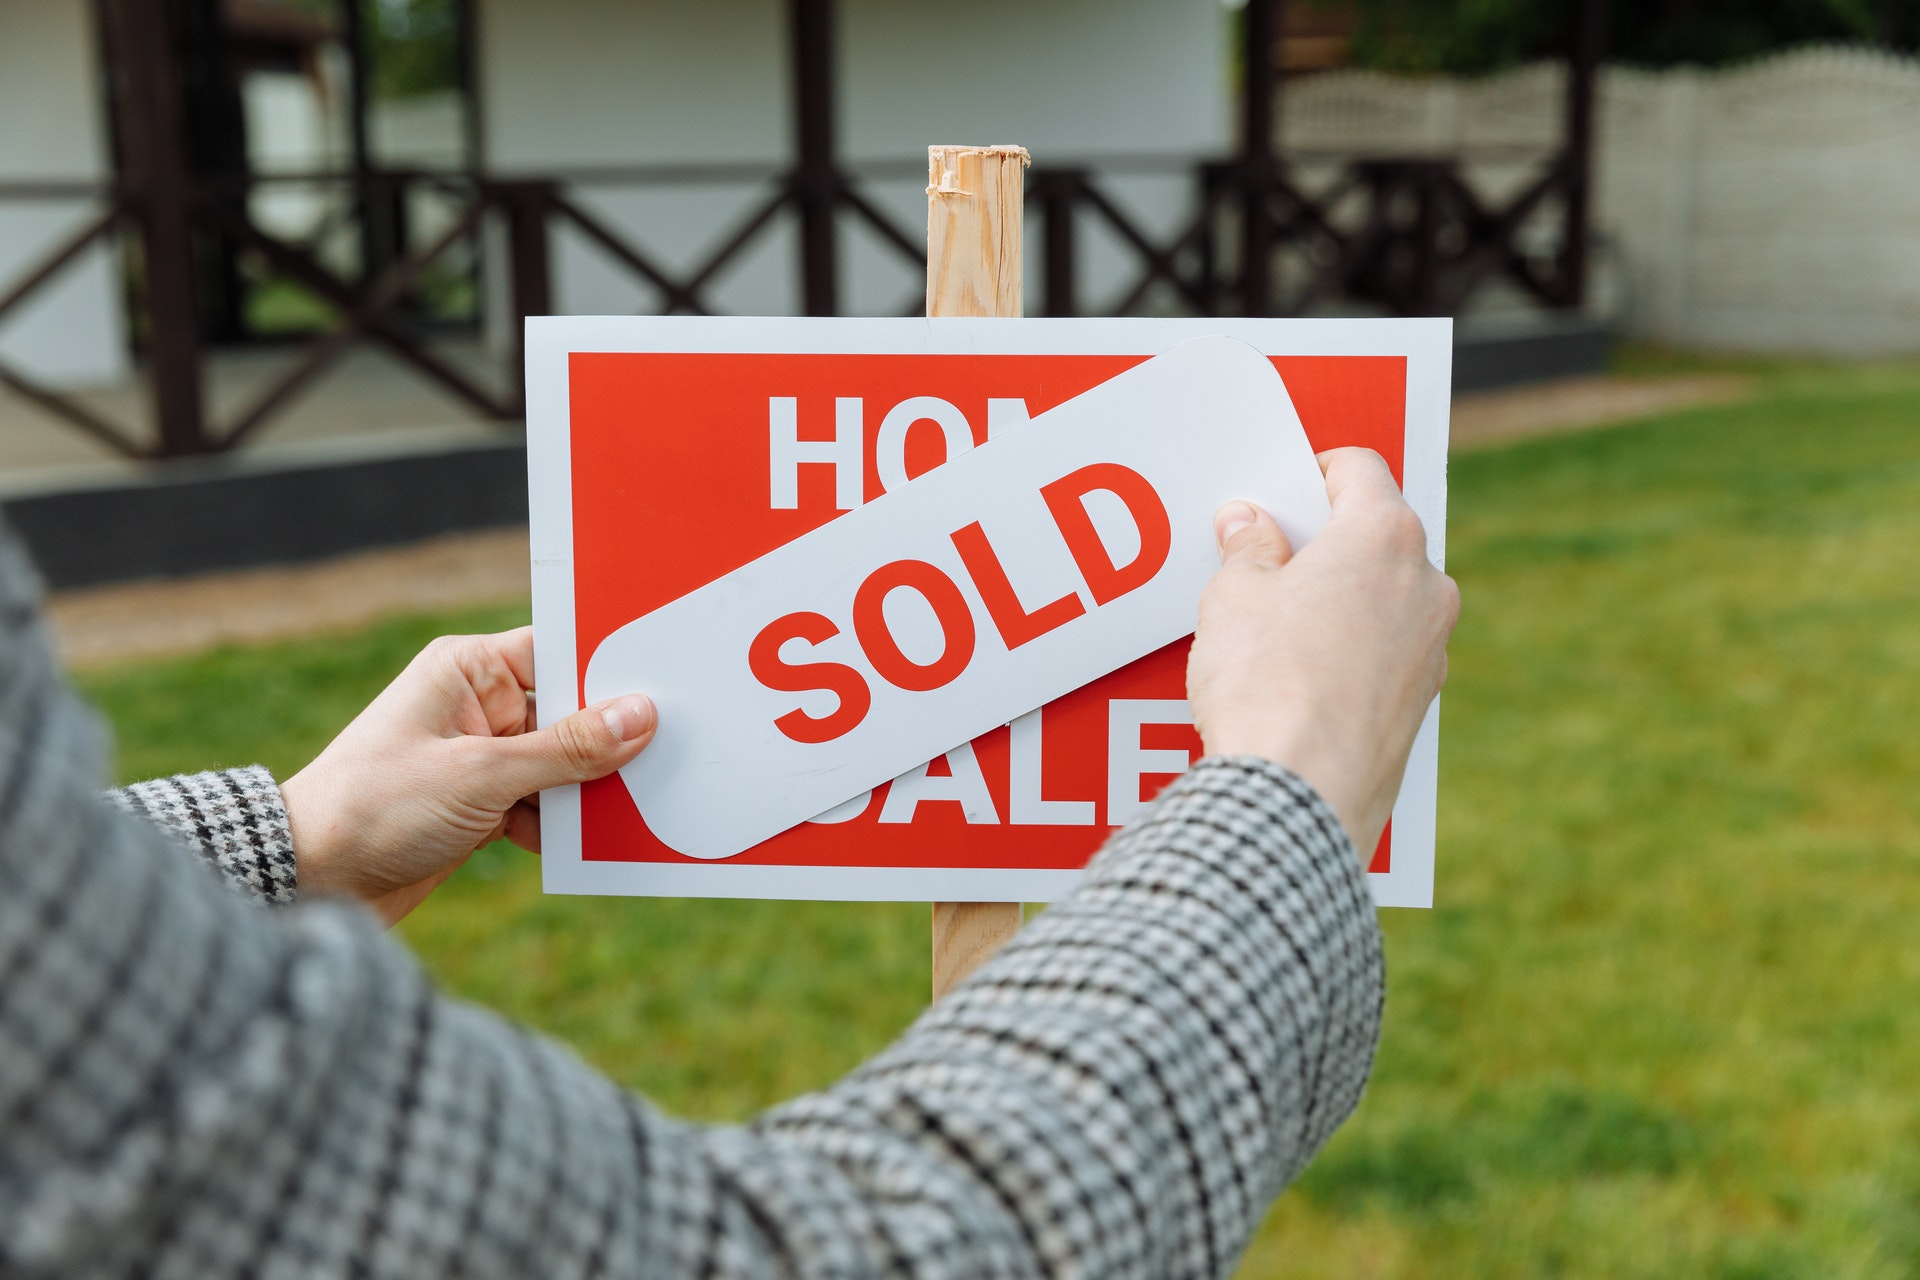 Real Estate Agents: Prepare Clients to Buy a House